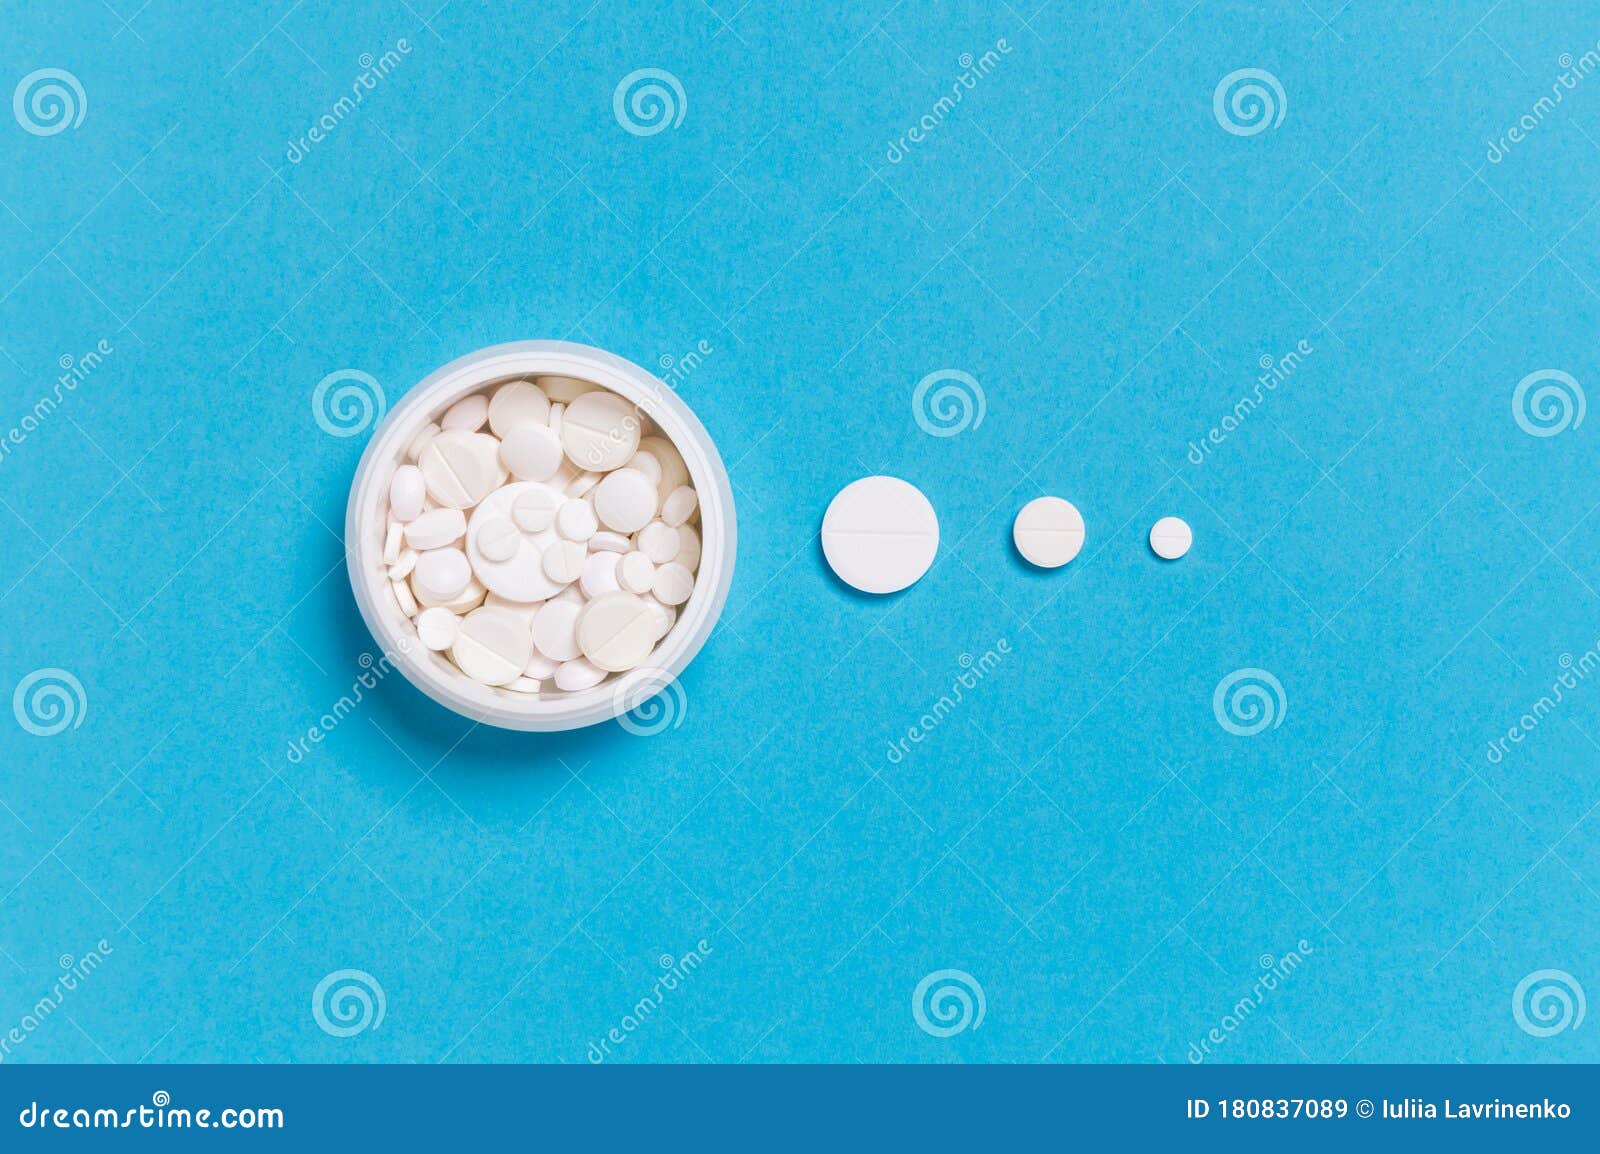 medicine bottle with white pills and dosis of different size drugs on blue background